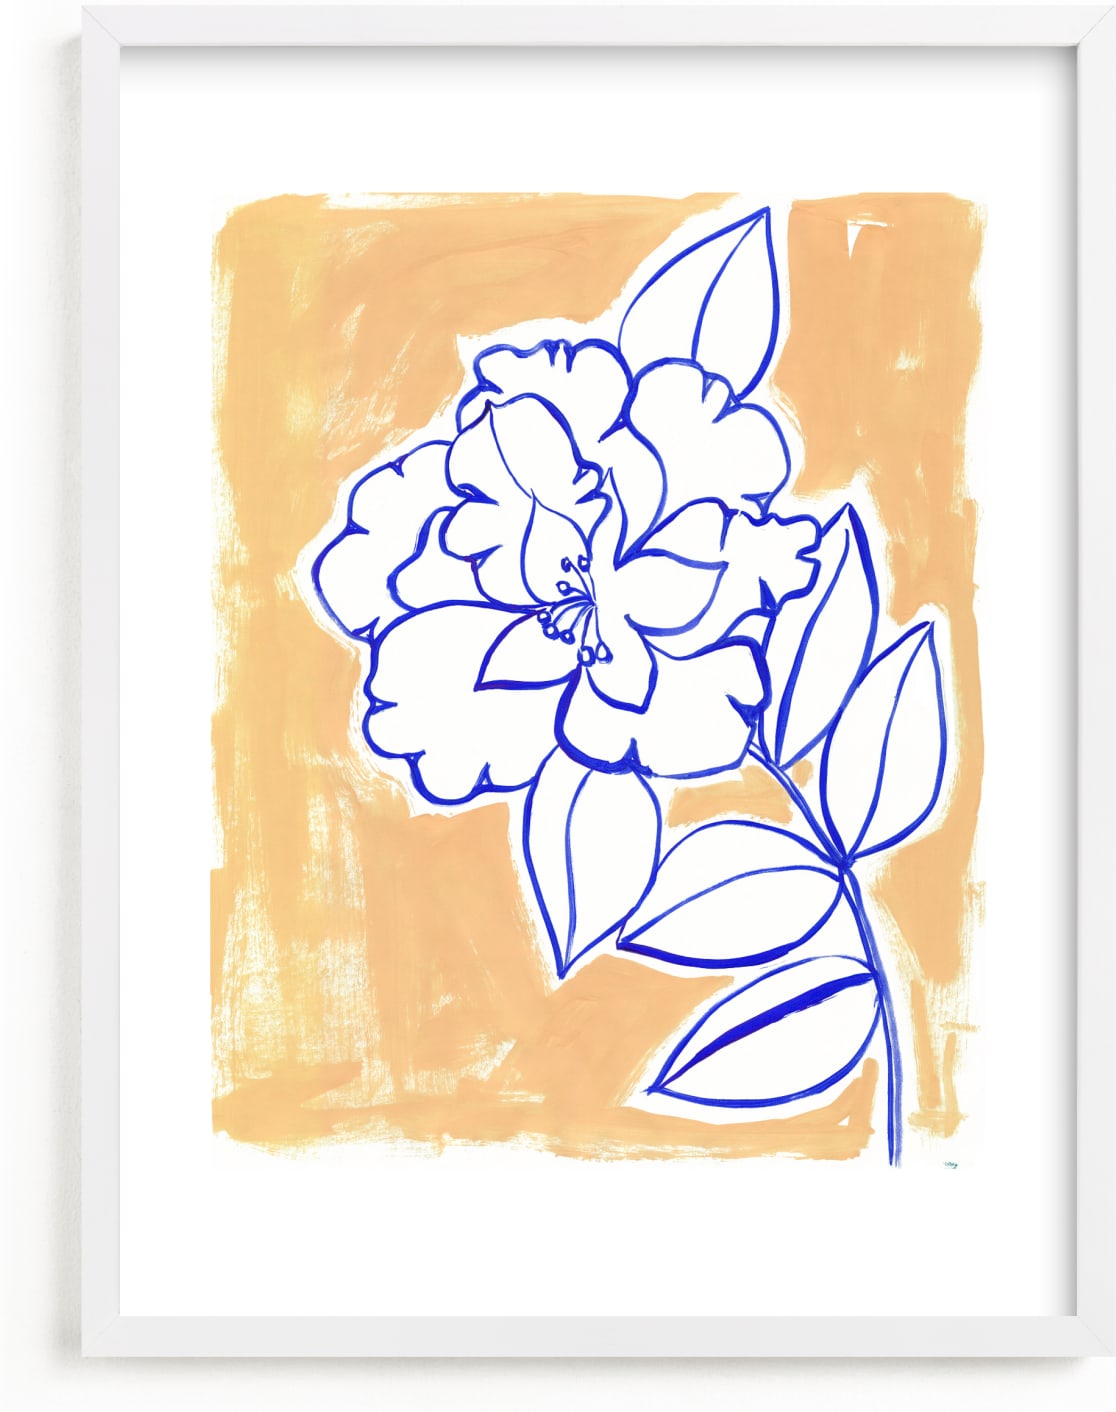 This is a blue kids wall art by Lise Gulassa called Lush Botanical Gallery I.